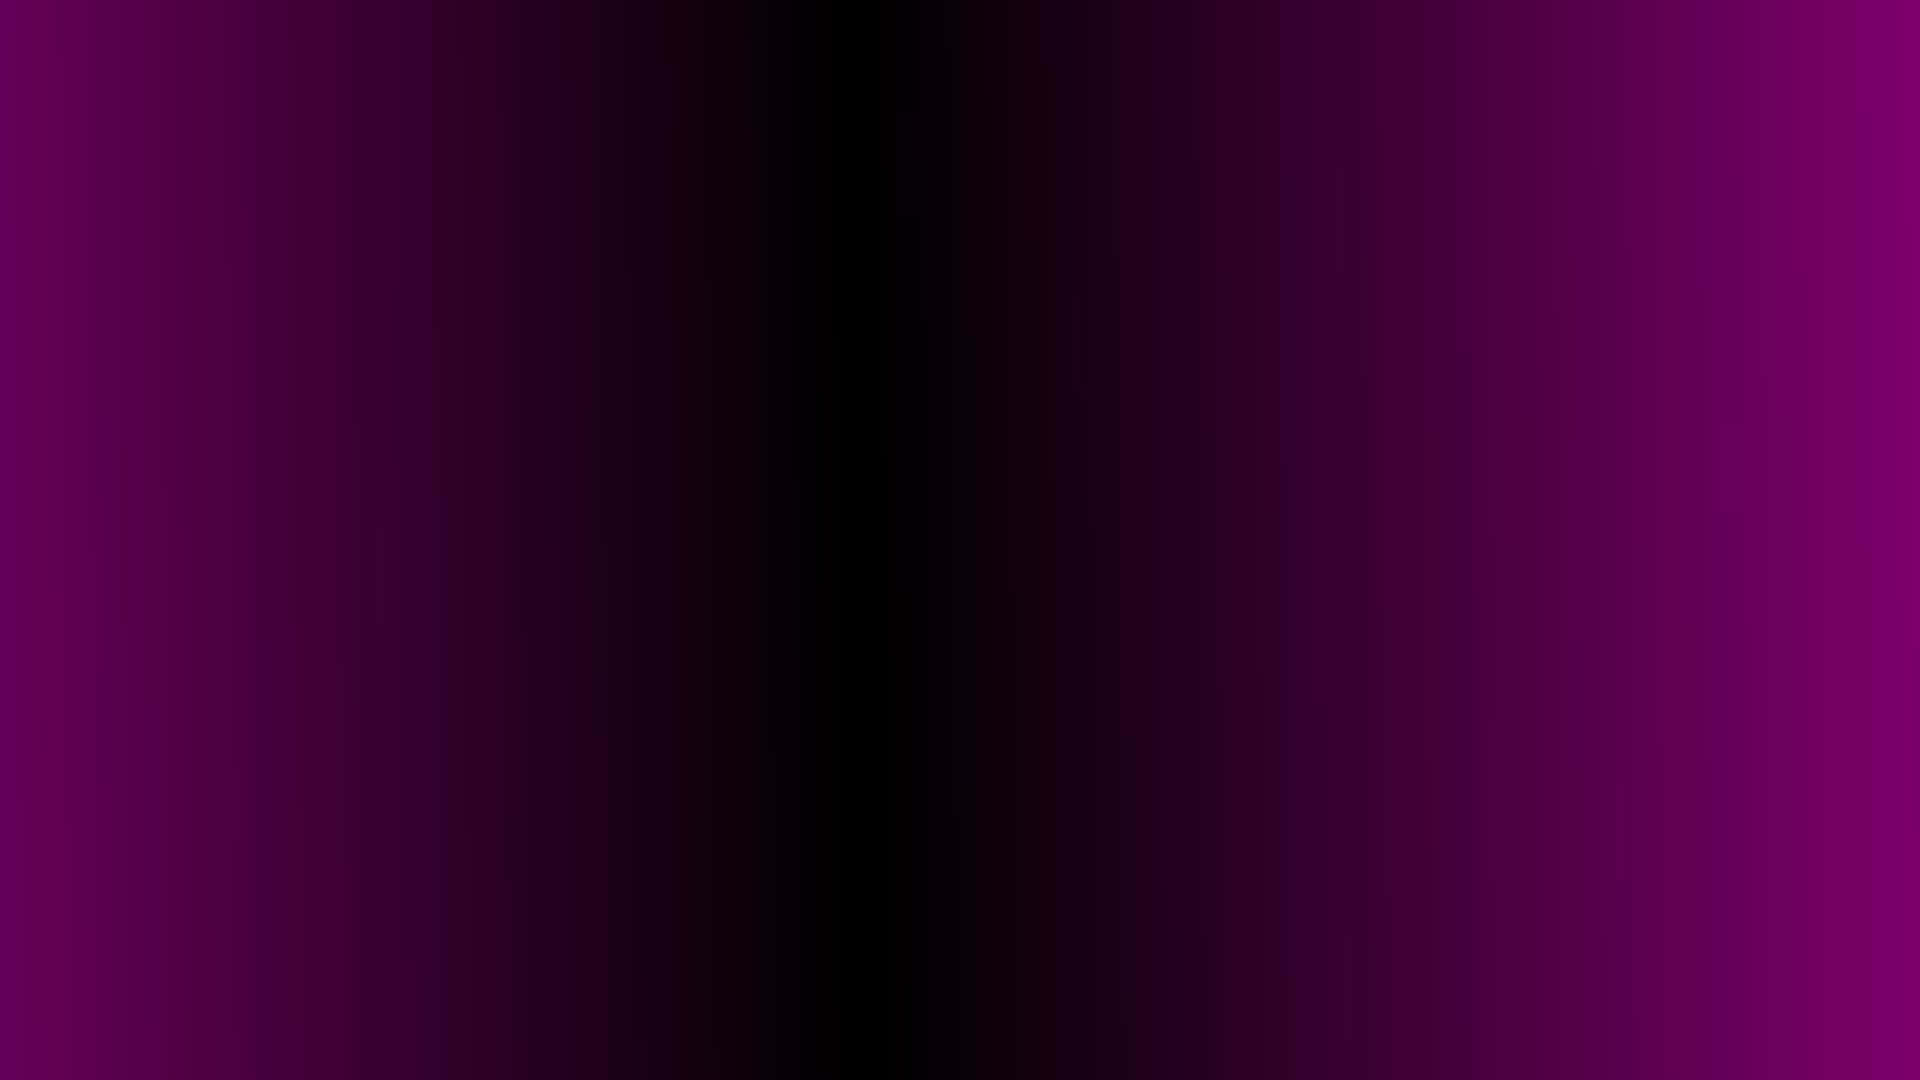 A black and purple gradient background